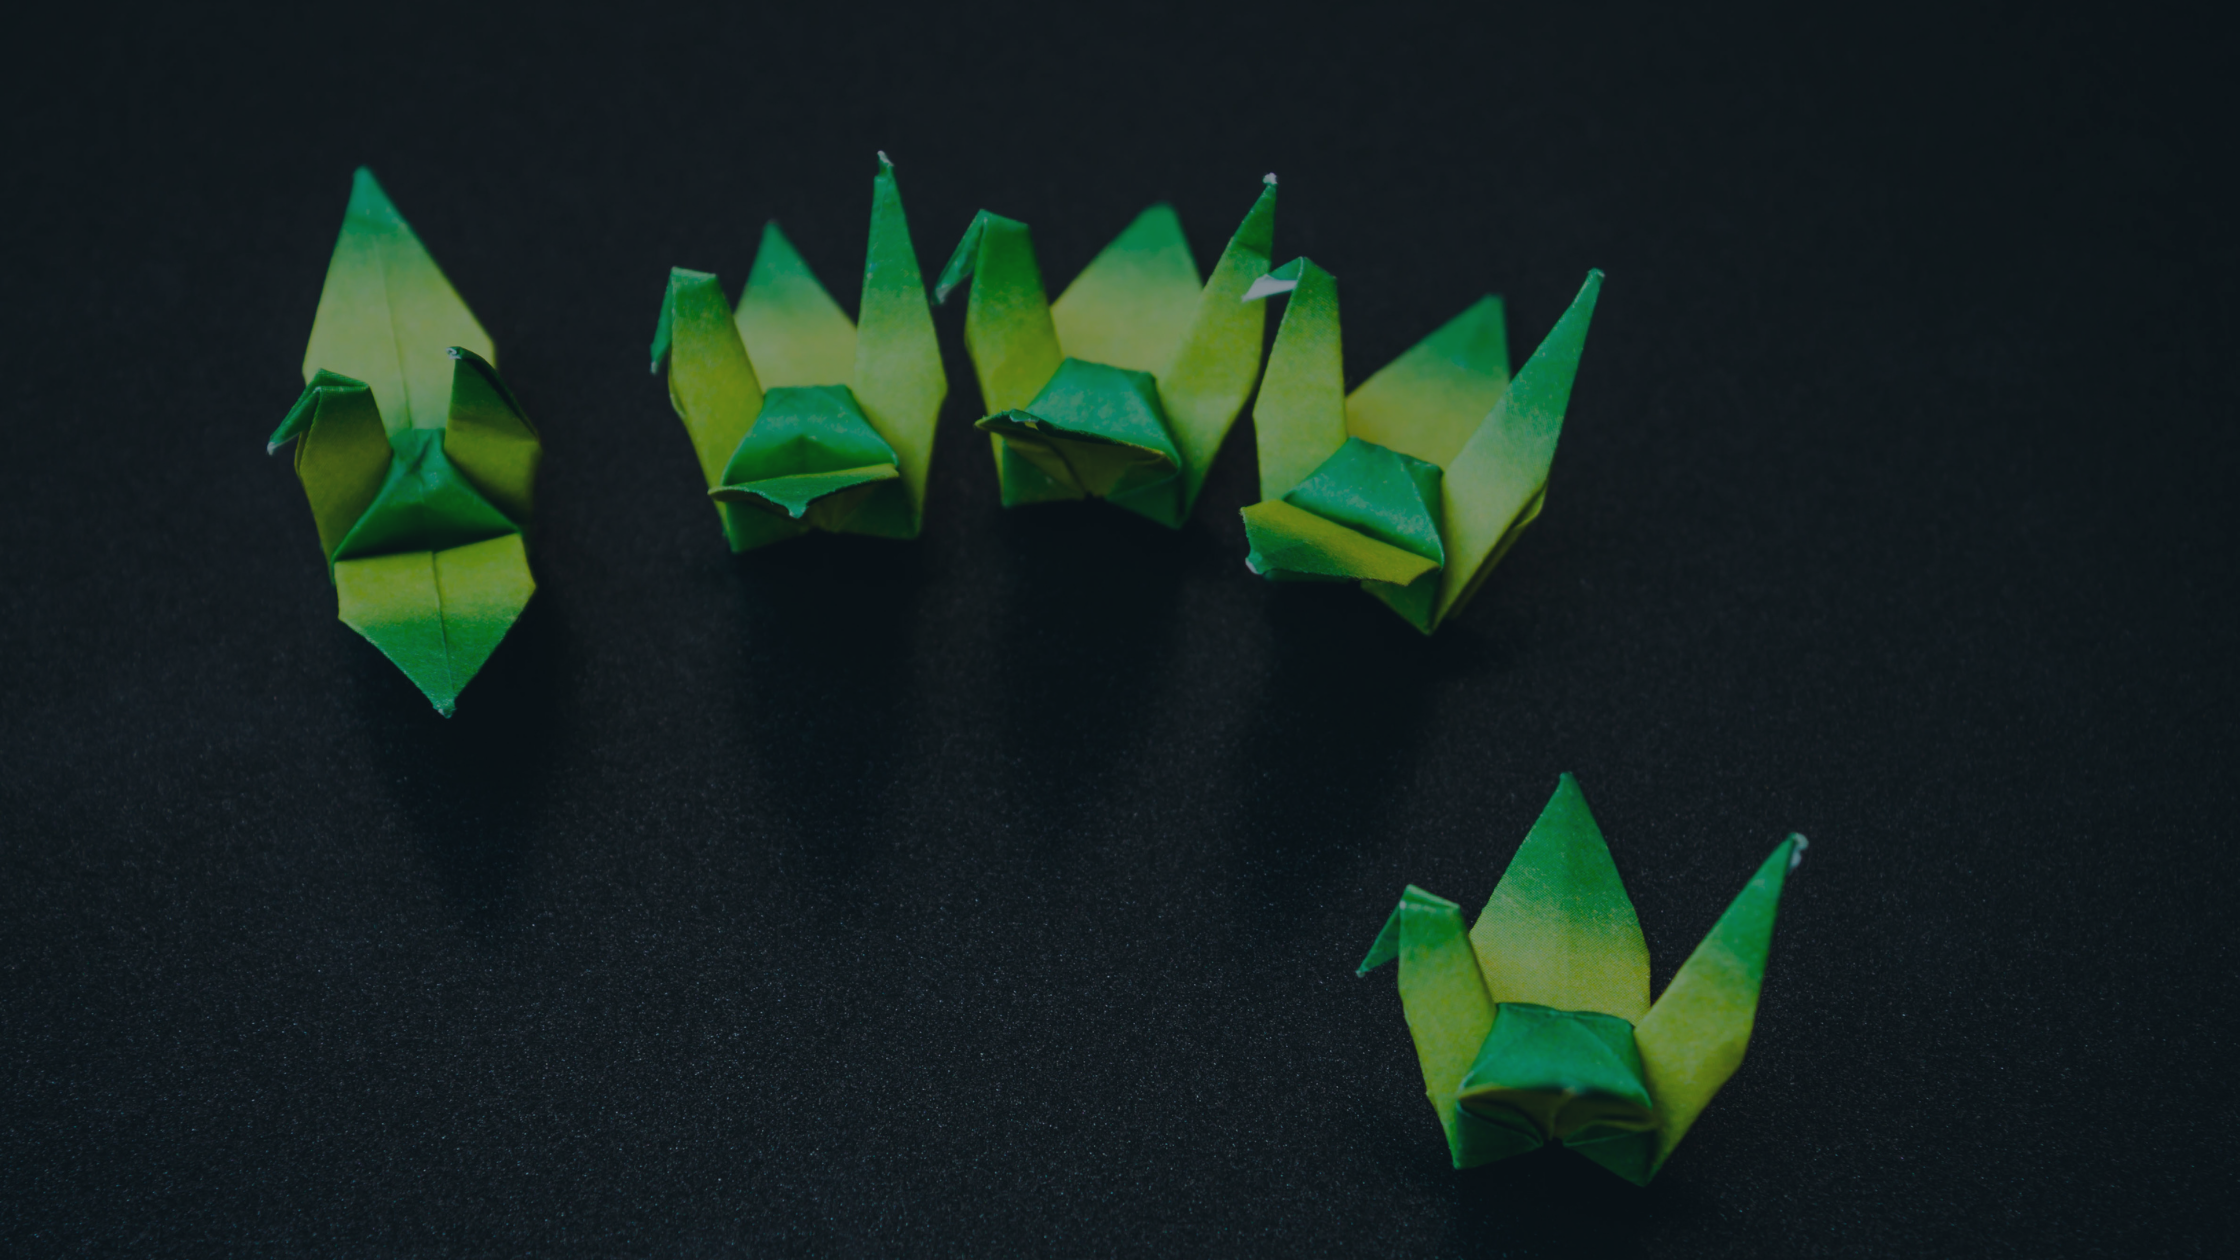 Origami ducks in a row to represent social proof.